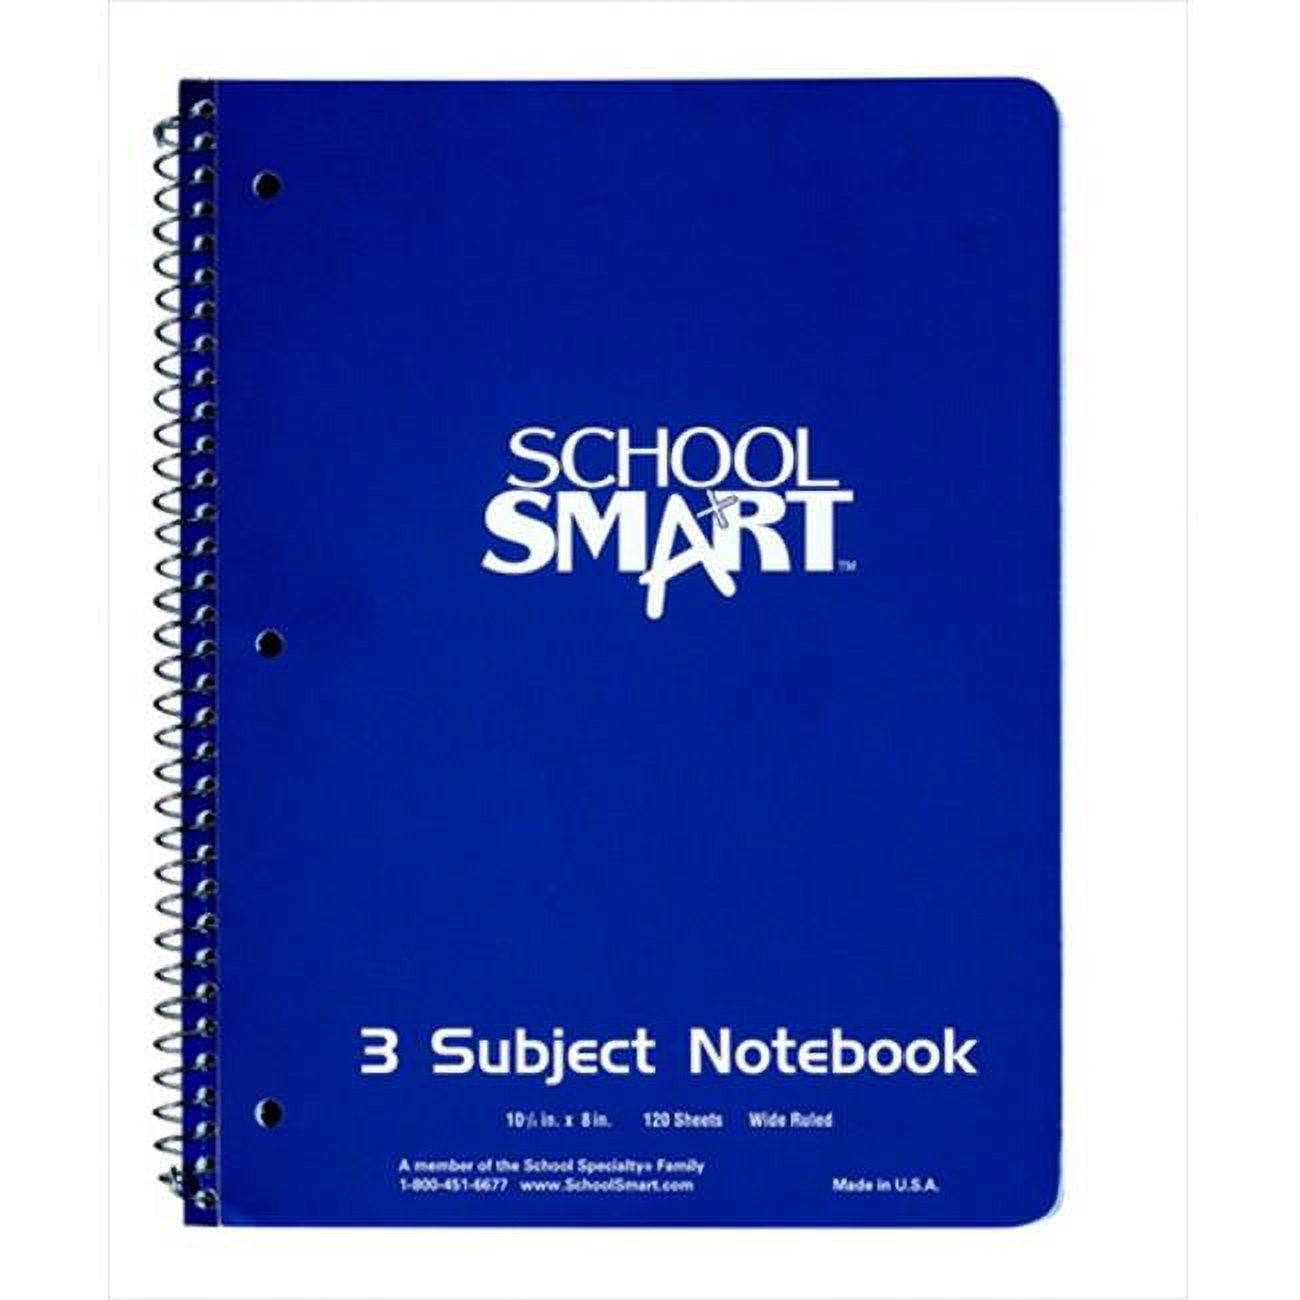 School Smart 086766 Sulphite 3-Hole Punched Non-Perforated Spiralbound Notebook - 1 Subject&#44; 5-1 & 2 x 4 In&#44; 15 Lb&#44; 0.34 In&#44; Wide Ruling&#44; 200 Sheets&#44; White - image 1 of 2